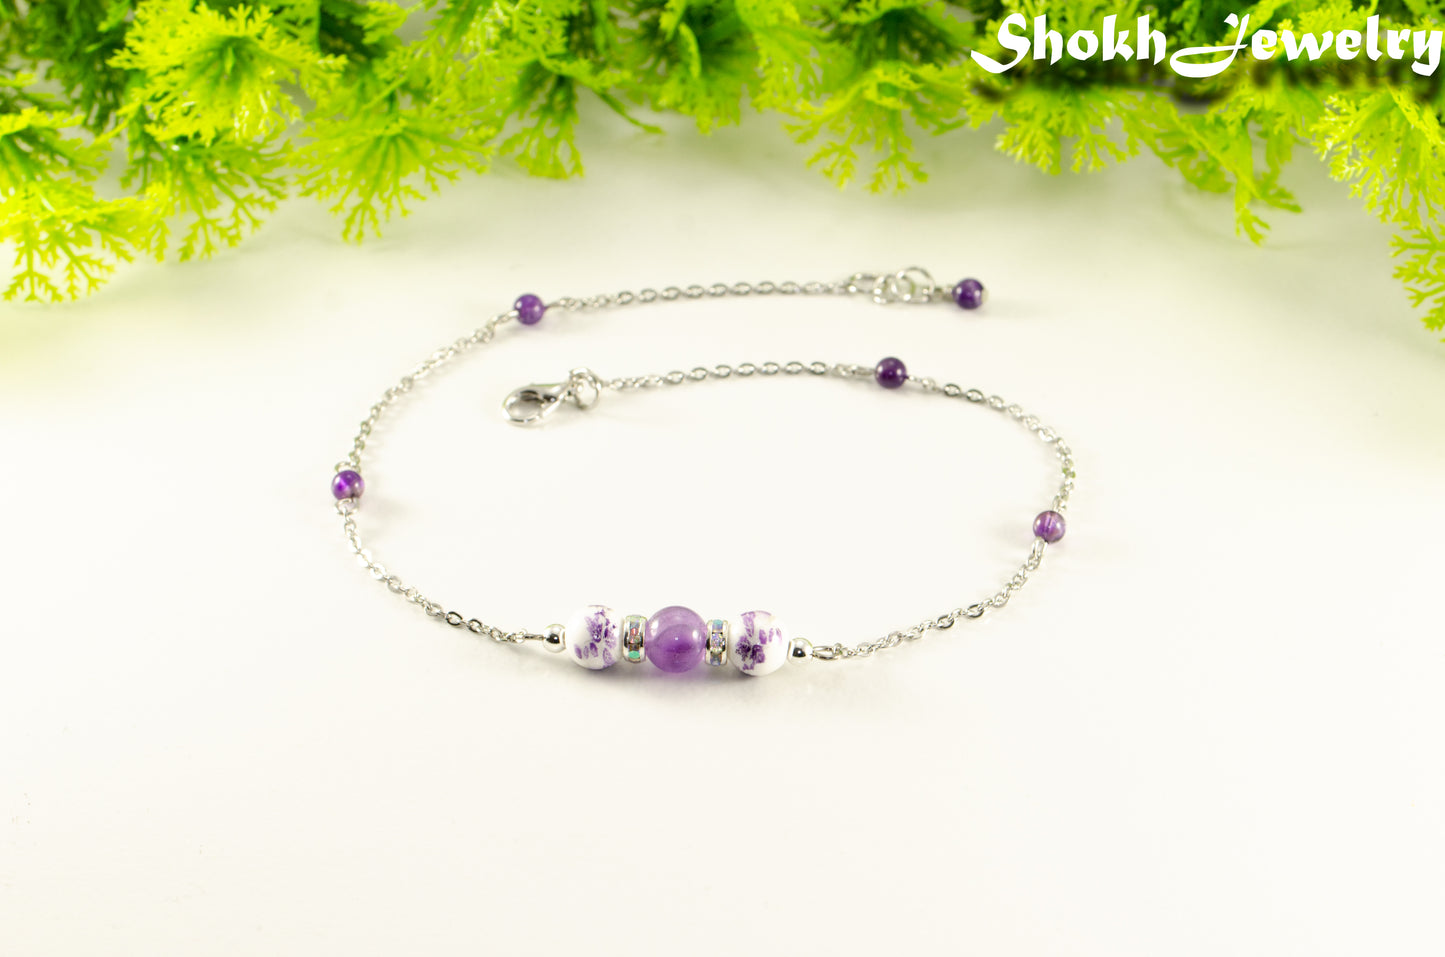 Natural Amethyst and Floral Ceramic Beads Choker Necklace